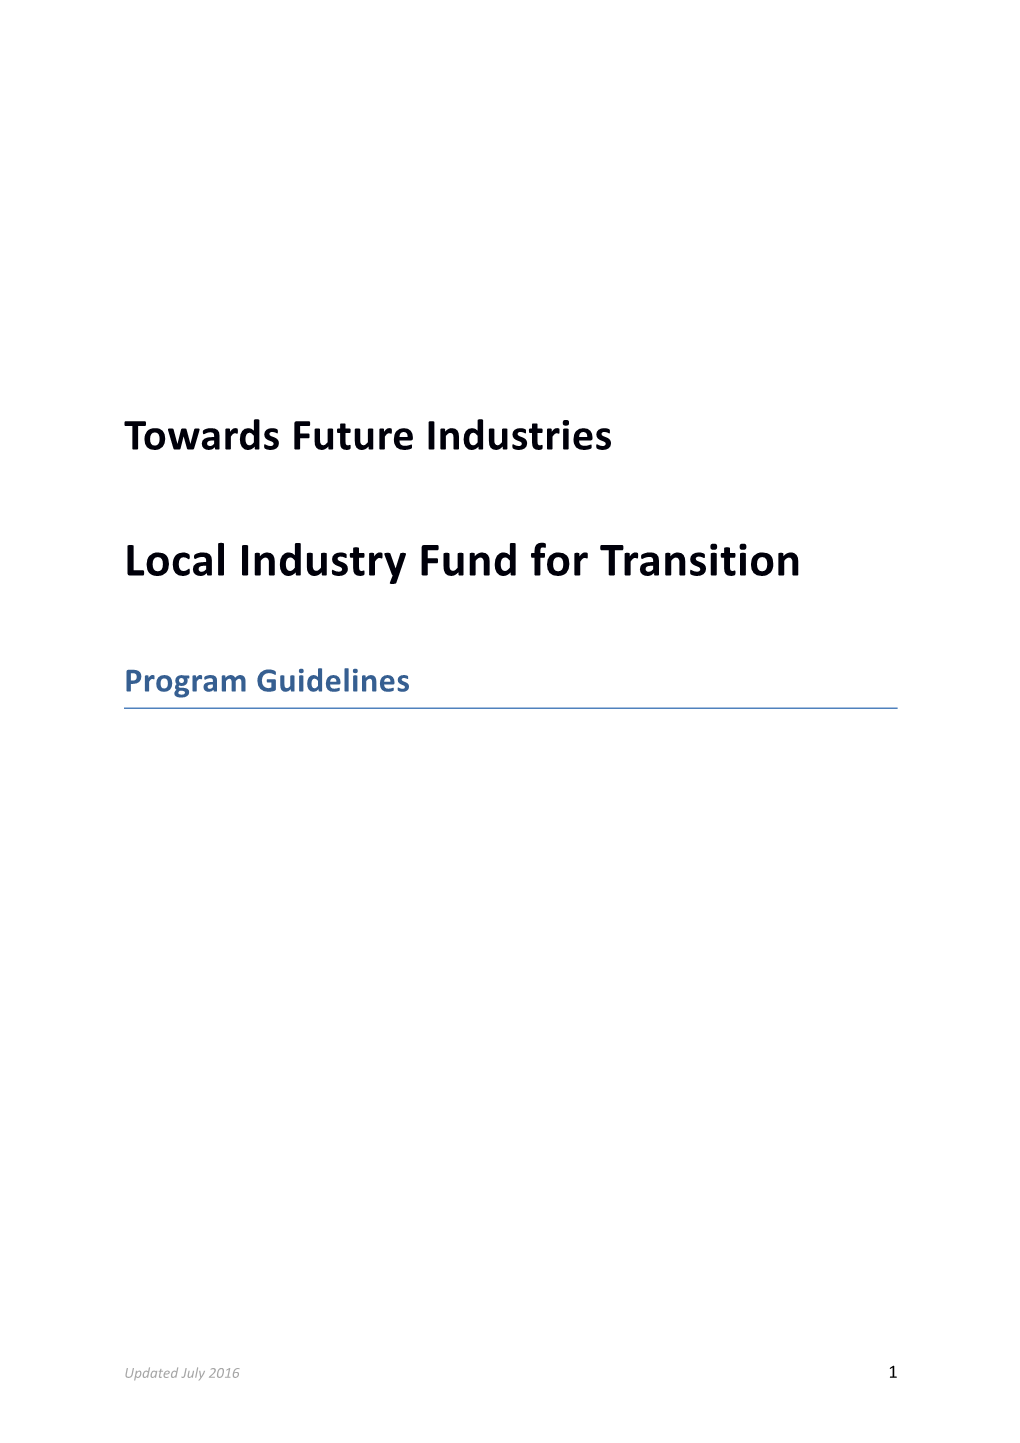 Local Industry Fund for Transition